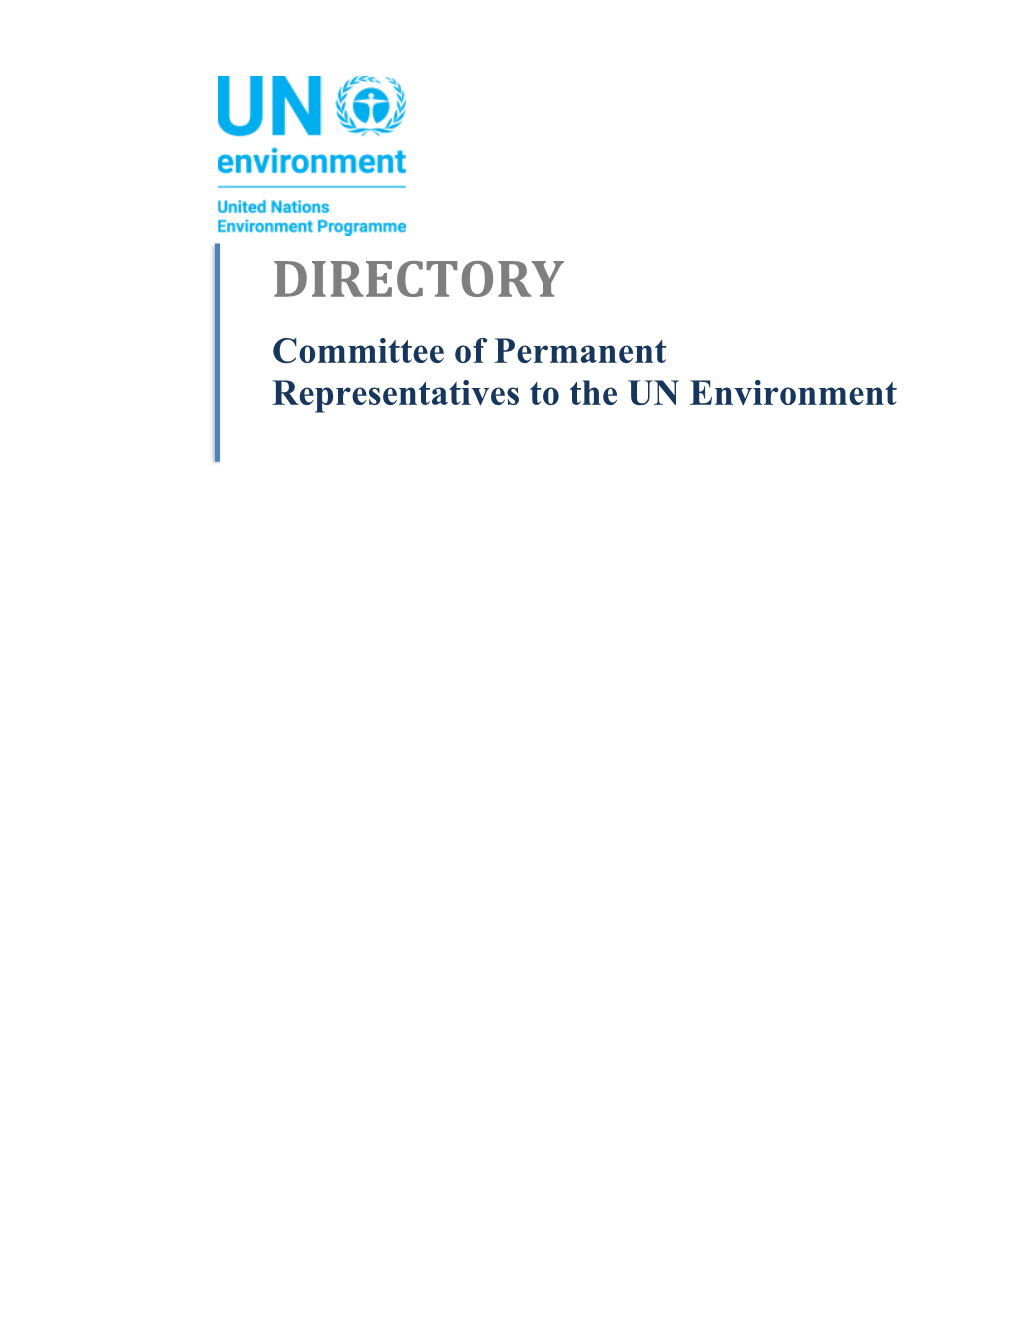 DIRECTORY Committee of Permanent Representatives to the UN Environment